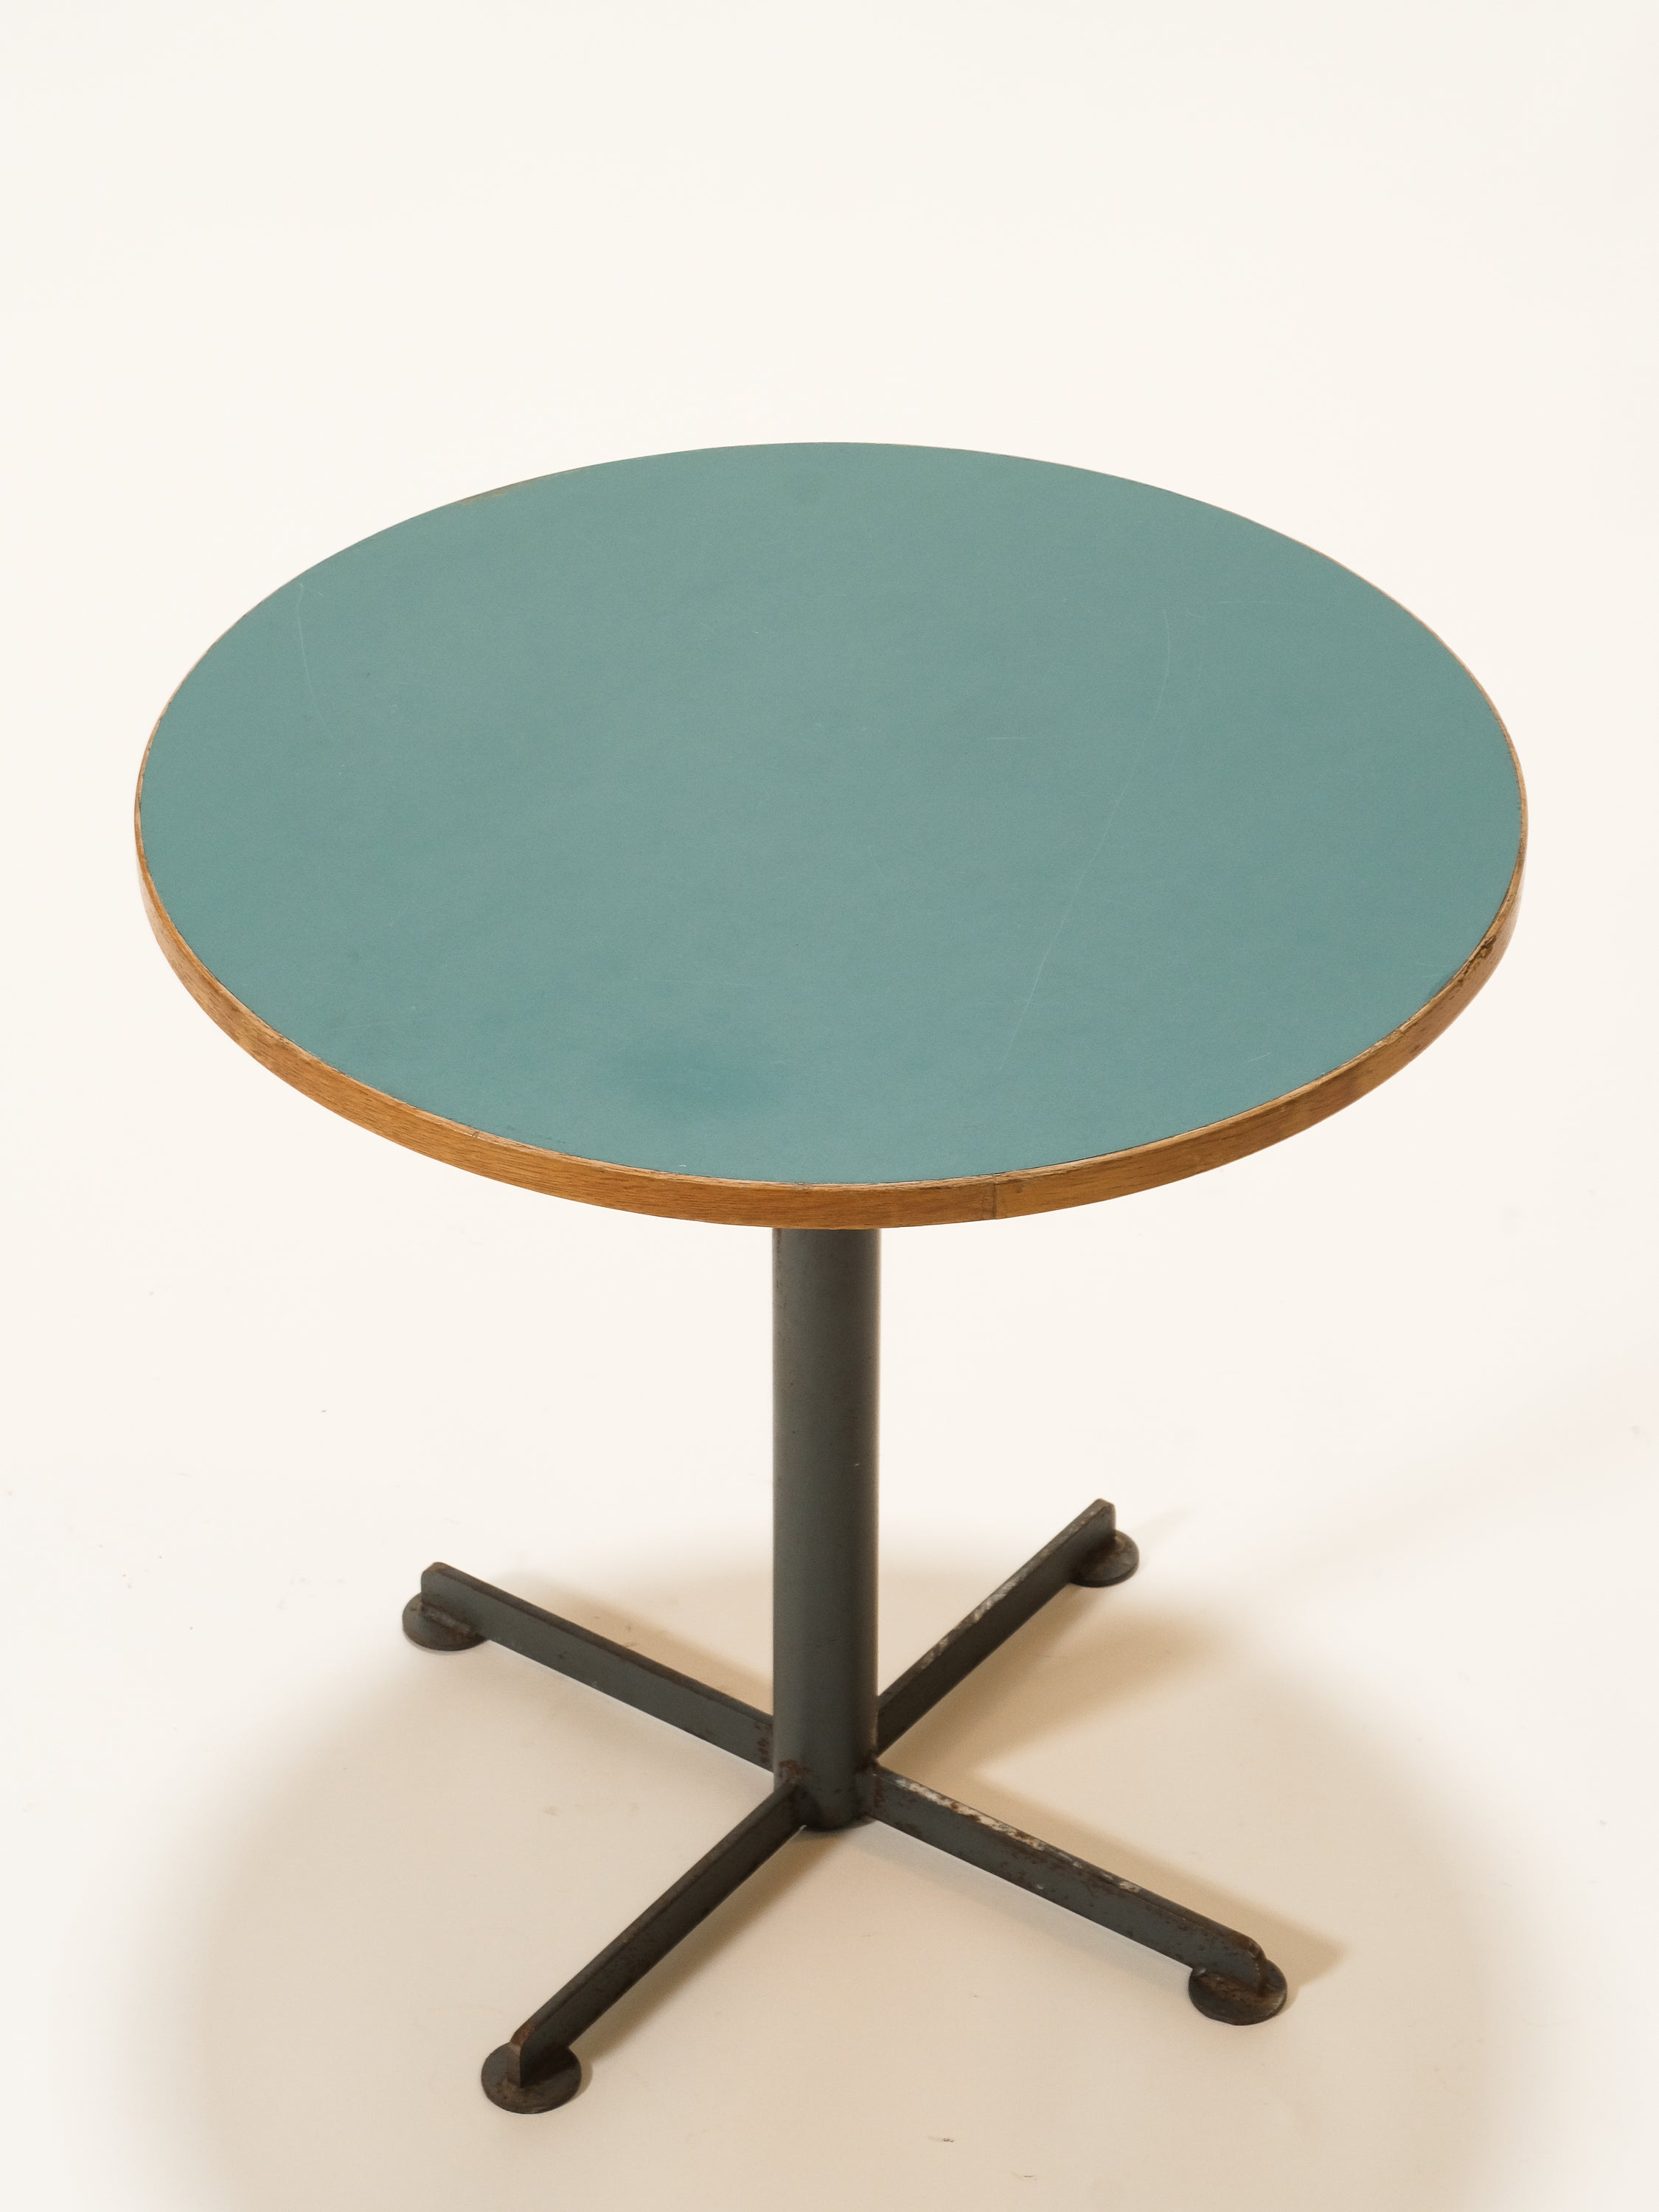 Vintage Round Coffee Table with Turquoise Linoleum Top